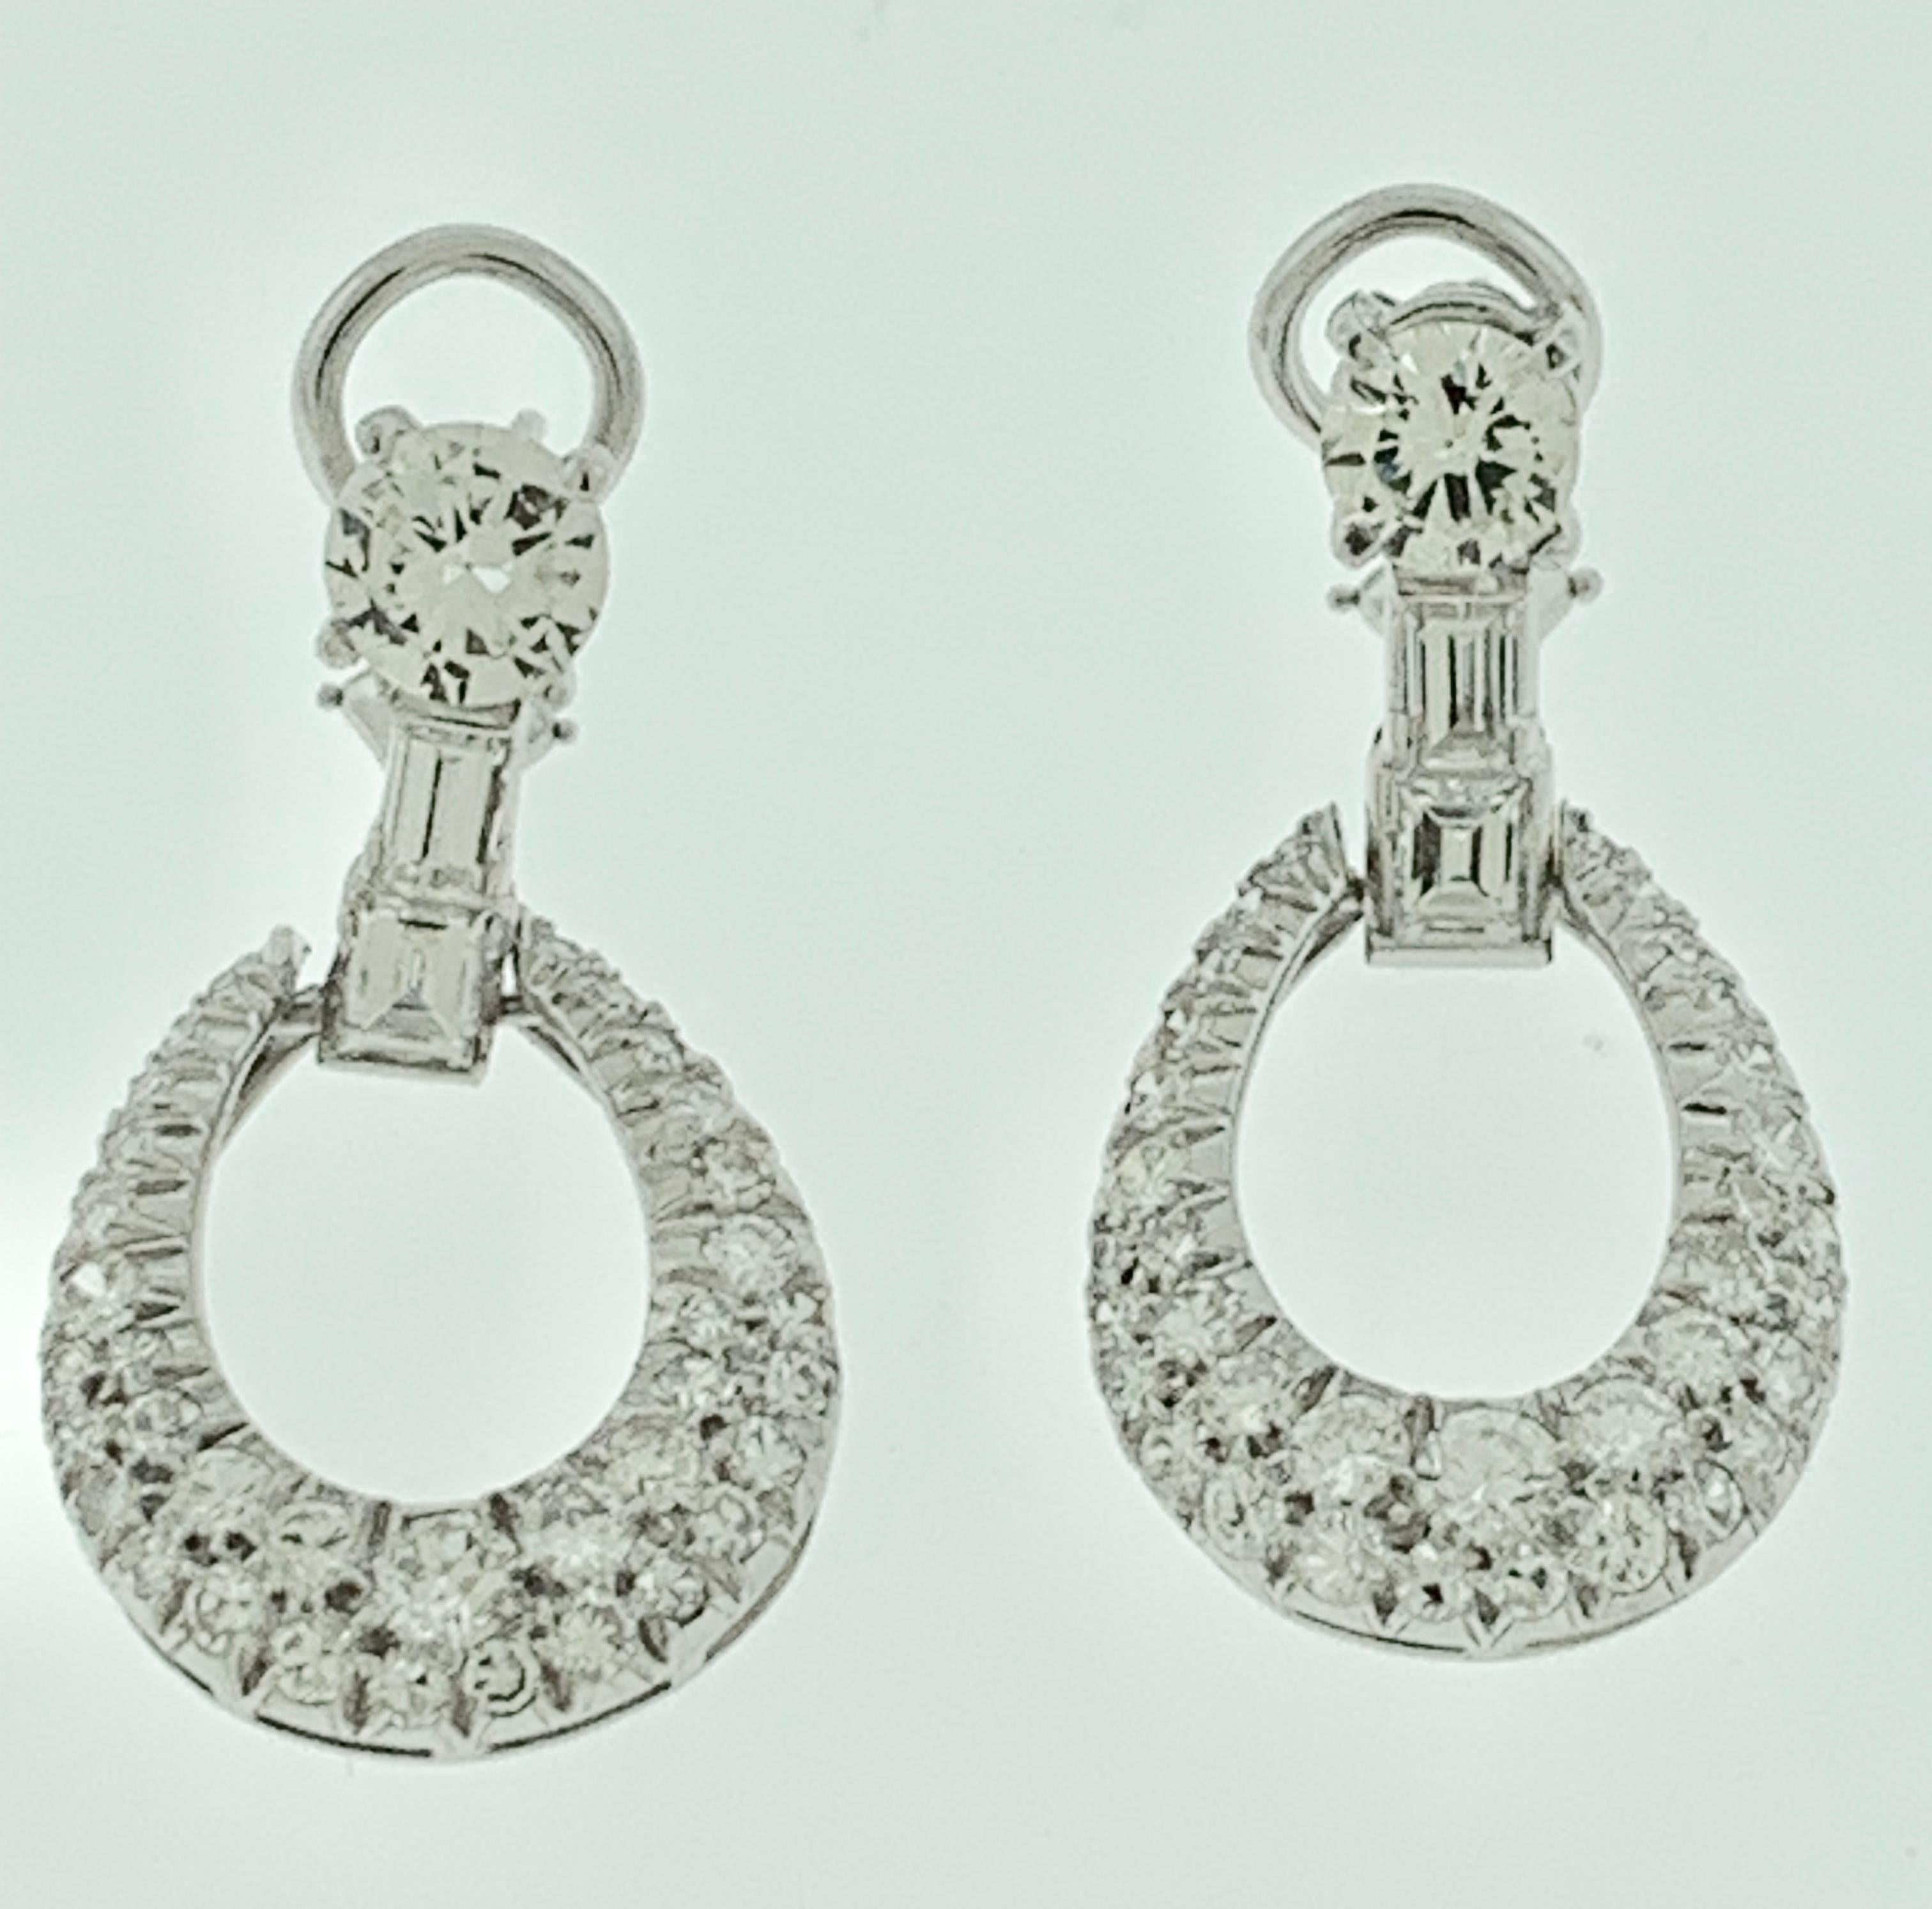 1950s 7 Ct Diamond Drop Cocktail Earrings Platinum with 2 Ct Solitaire Diamond For Sale 1